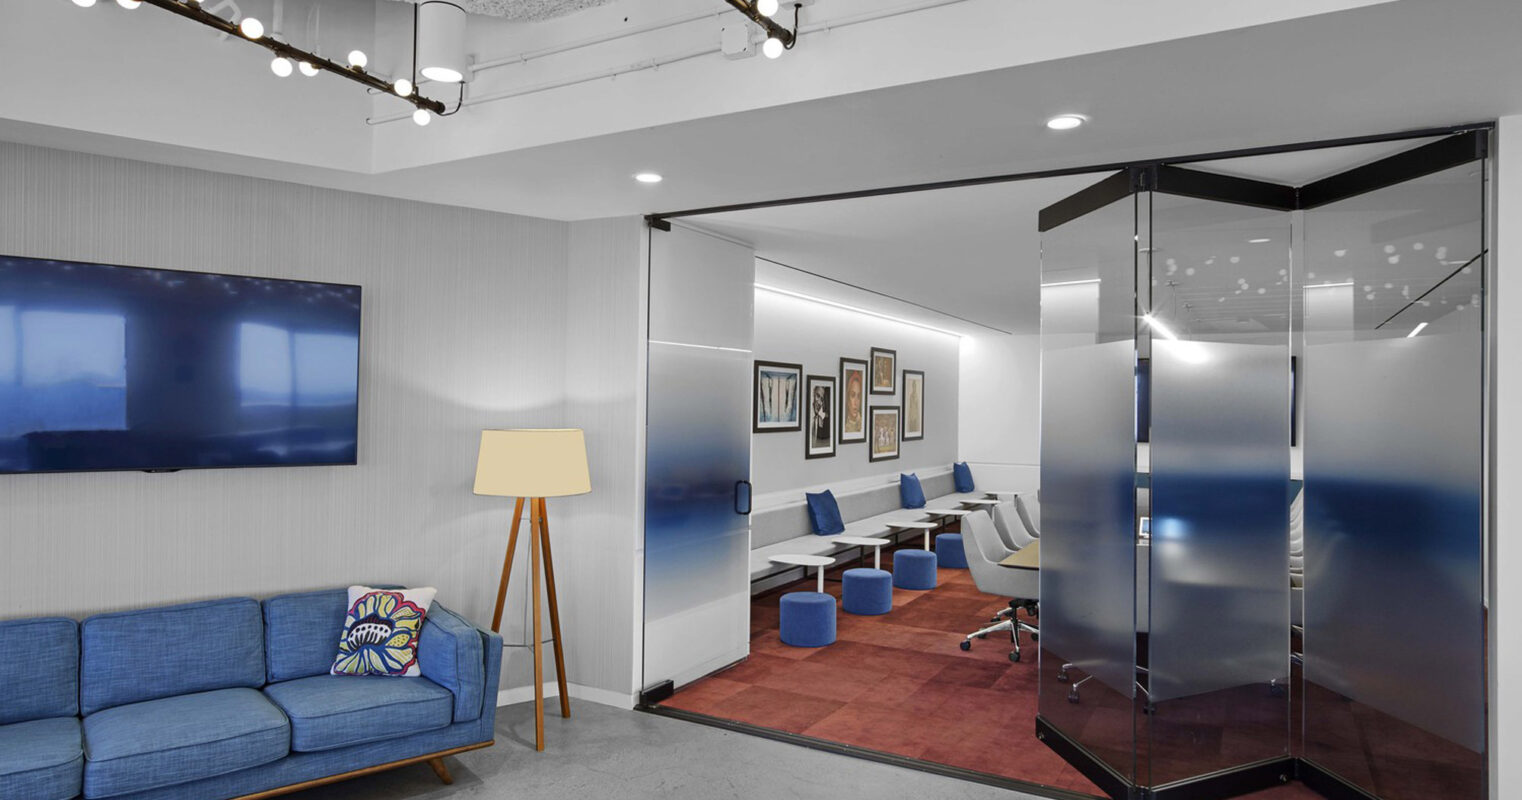 Modern office lounge with a vibrant blue upholstered couch, complemented by a minimalist floor lamp. Track lighting illuminates the space, leading to a glass-enclosed meeting area with sleek chairs and mounted digital displays.